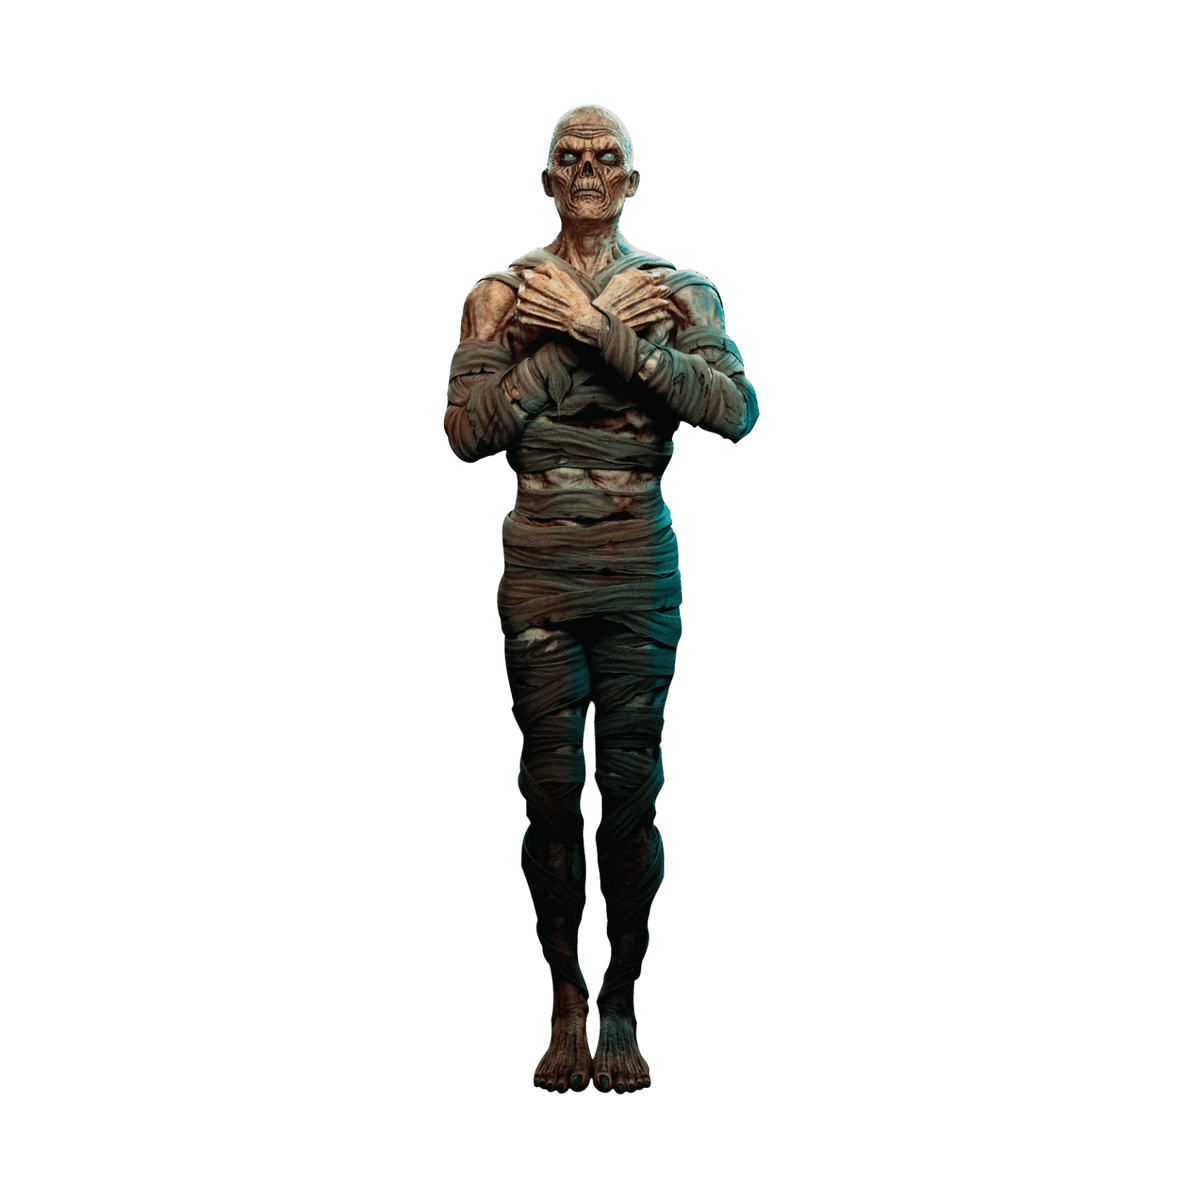 A Egyptian Guard Mummy Zombie with crossed arms and visible skeletal features against a plain green background, perfect as Halloween decor by Cover-Alls.